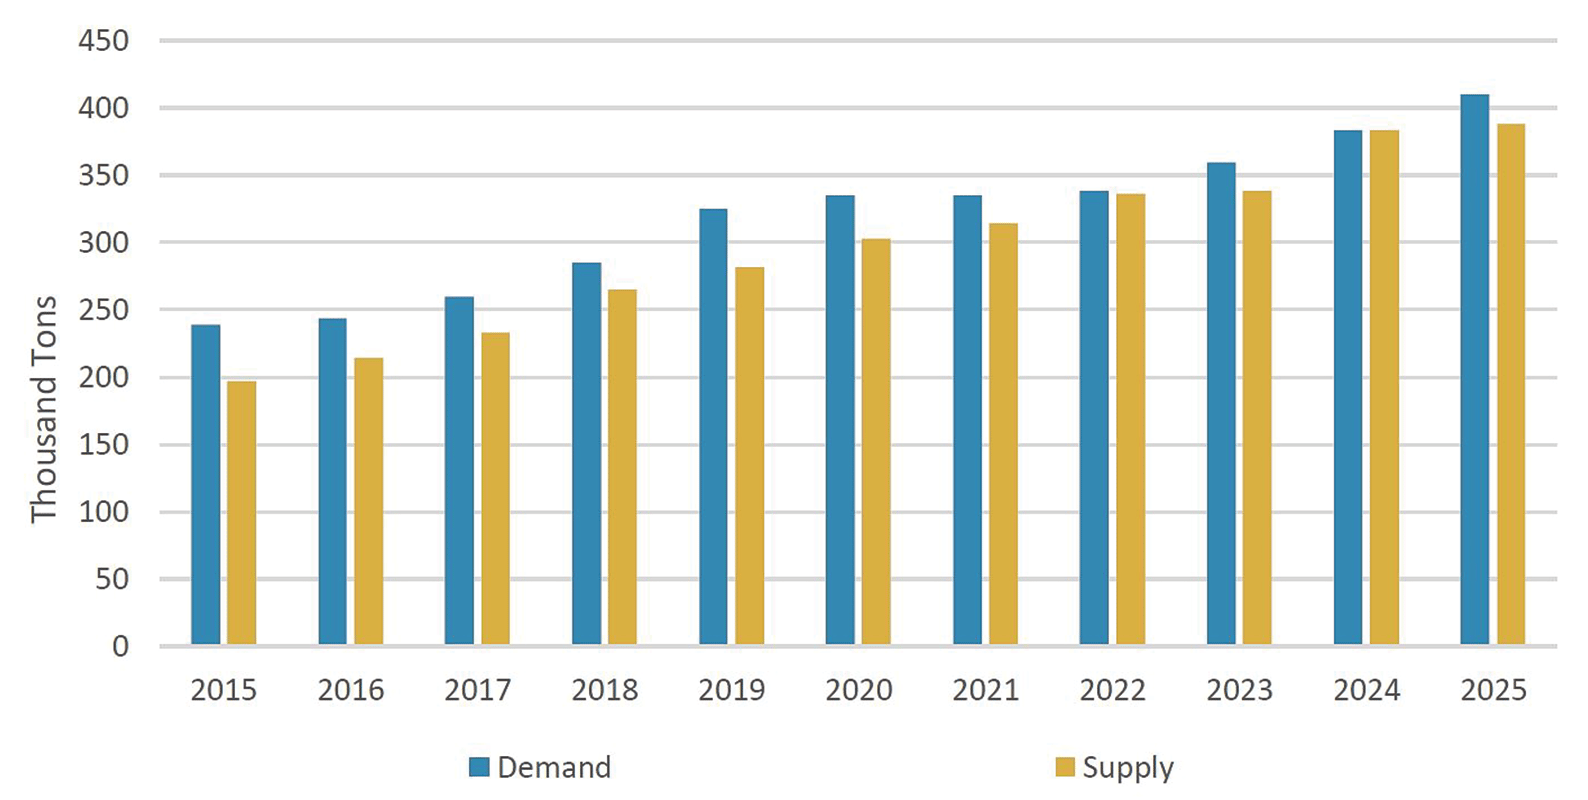 Global demand and supply projections for lithium